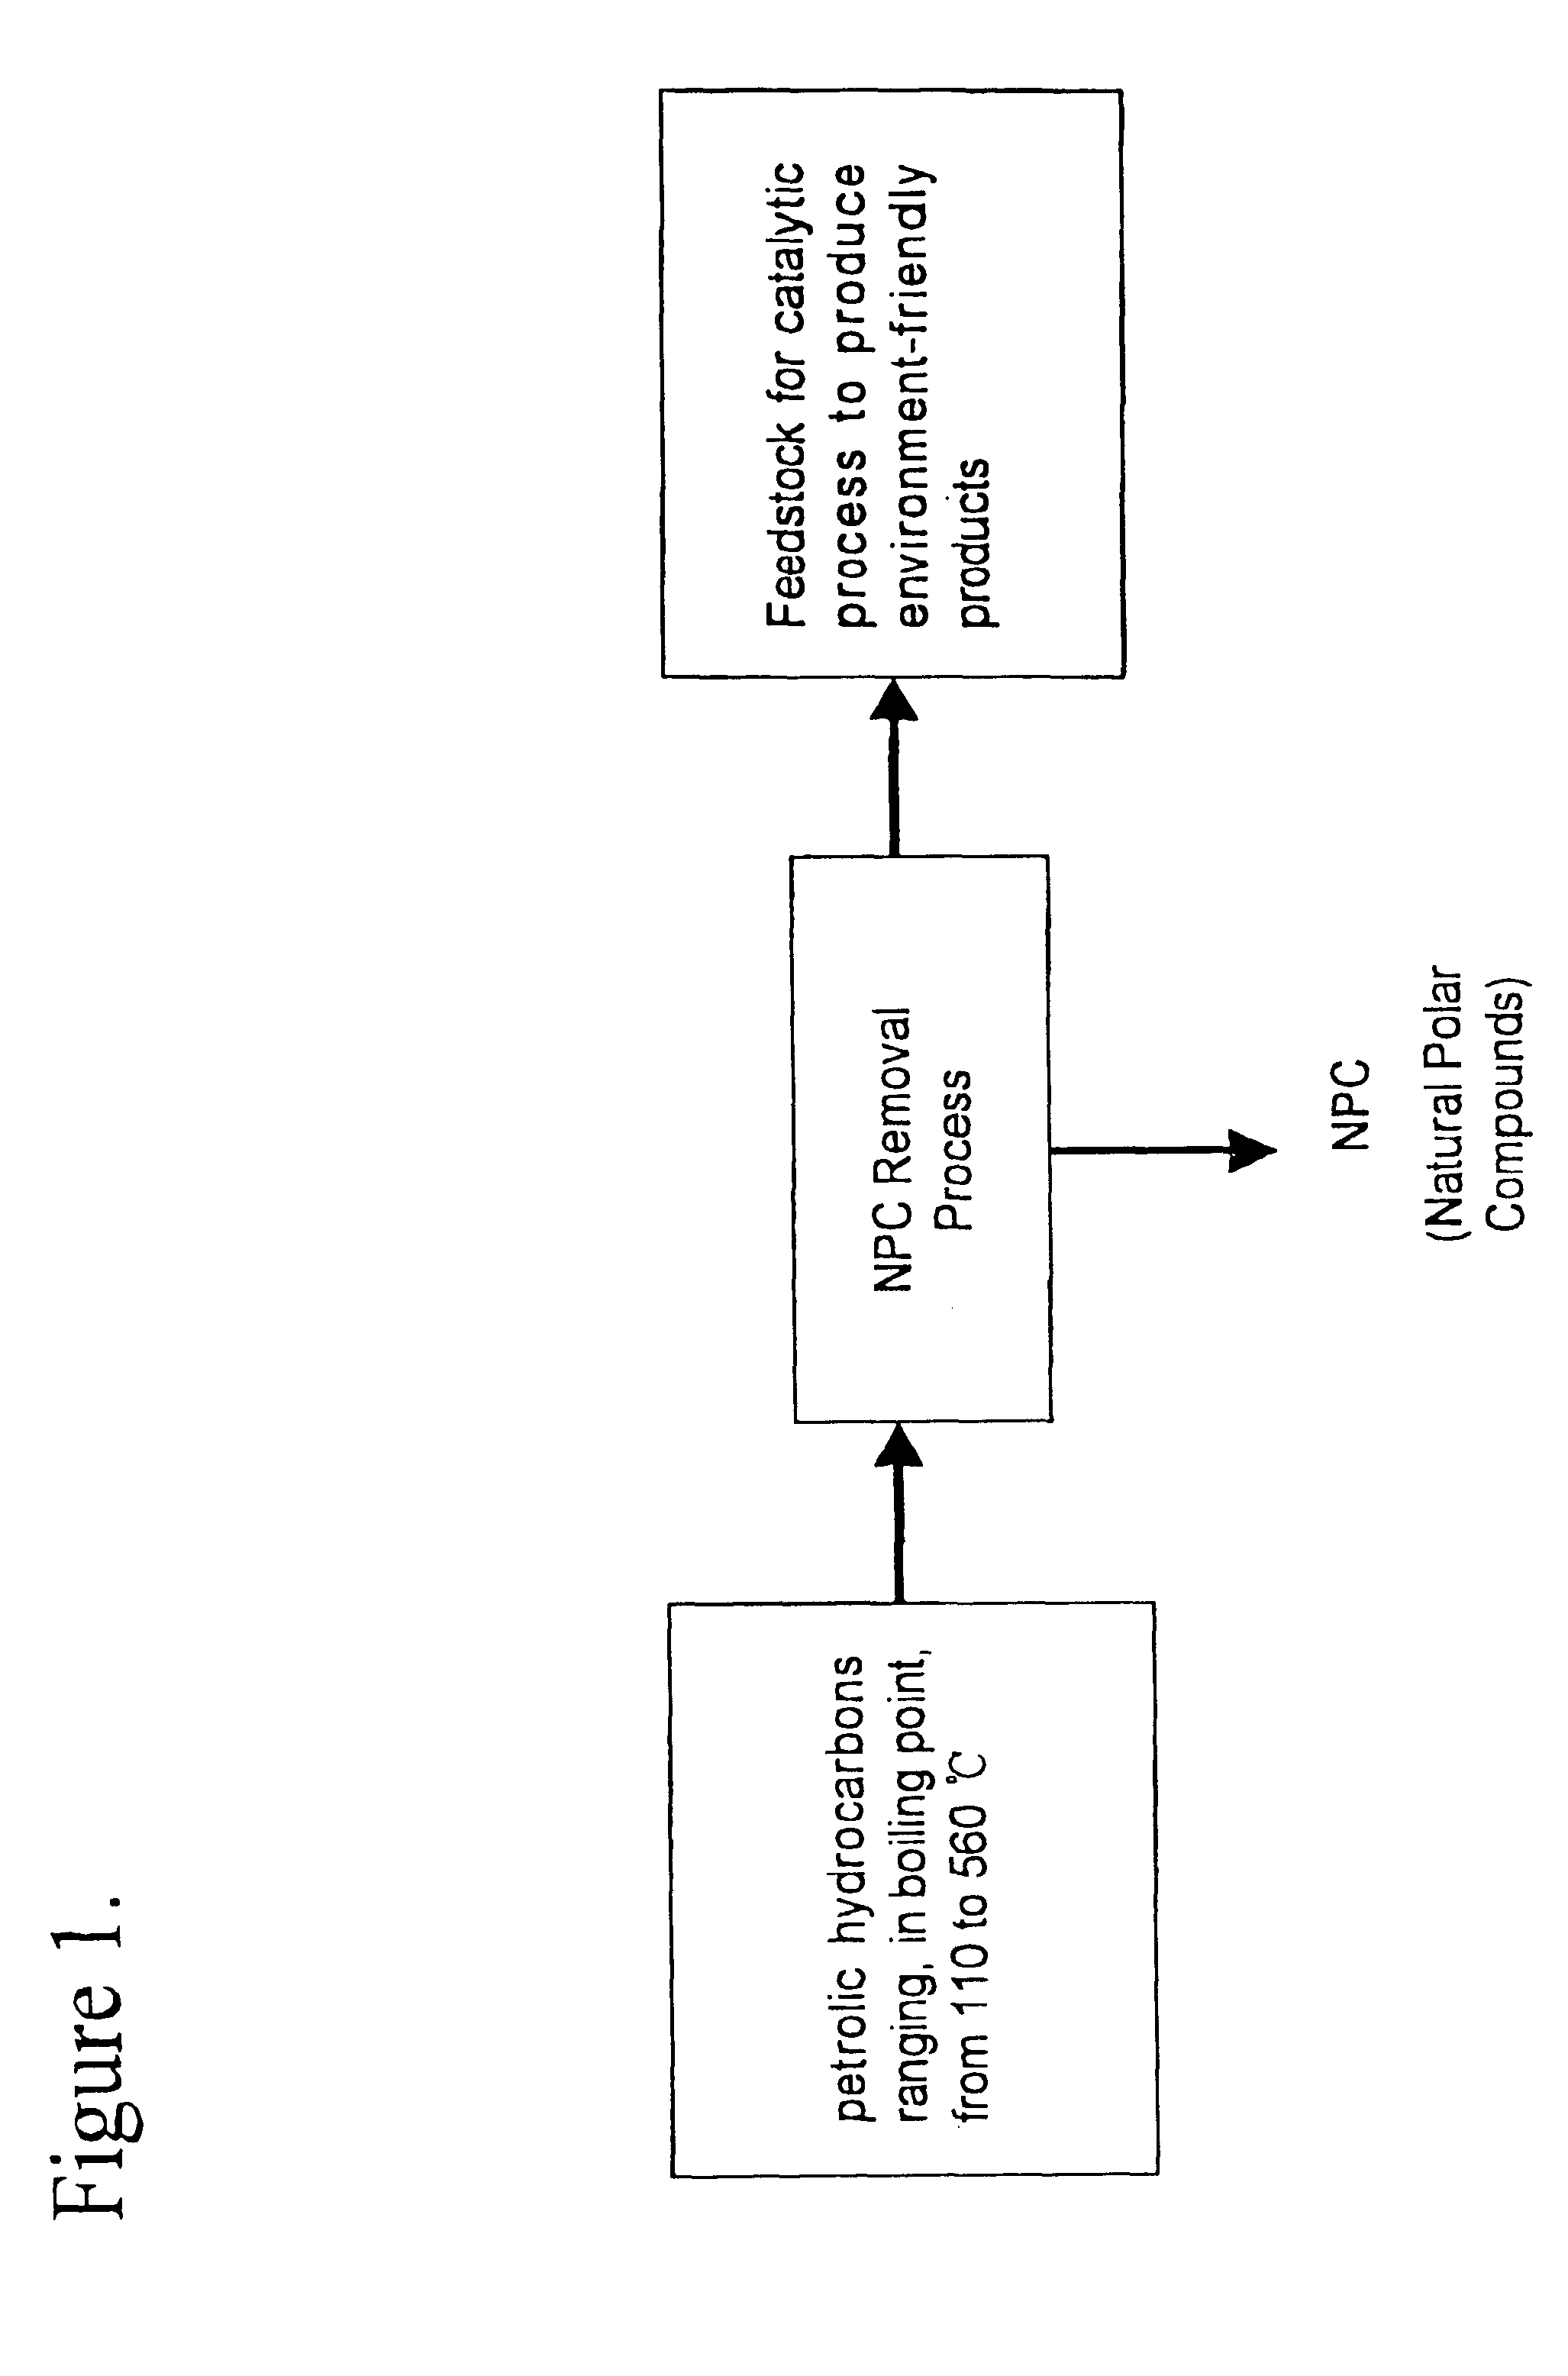 Method for manufacturing cleaner fuels